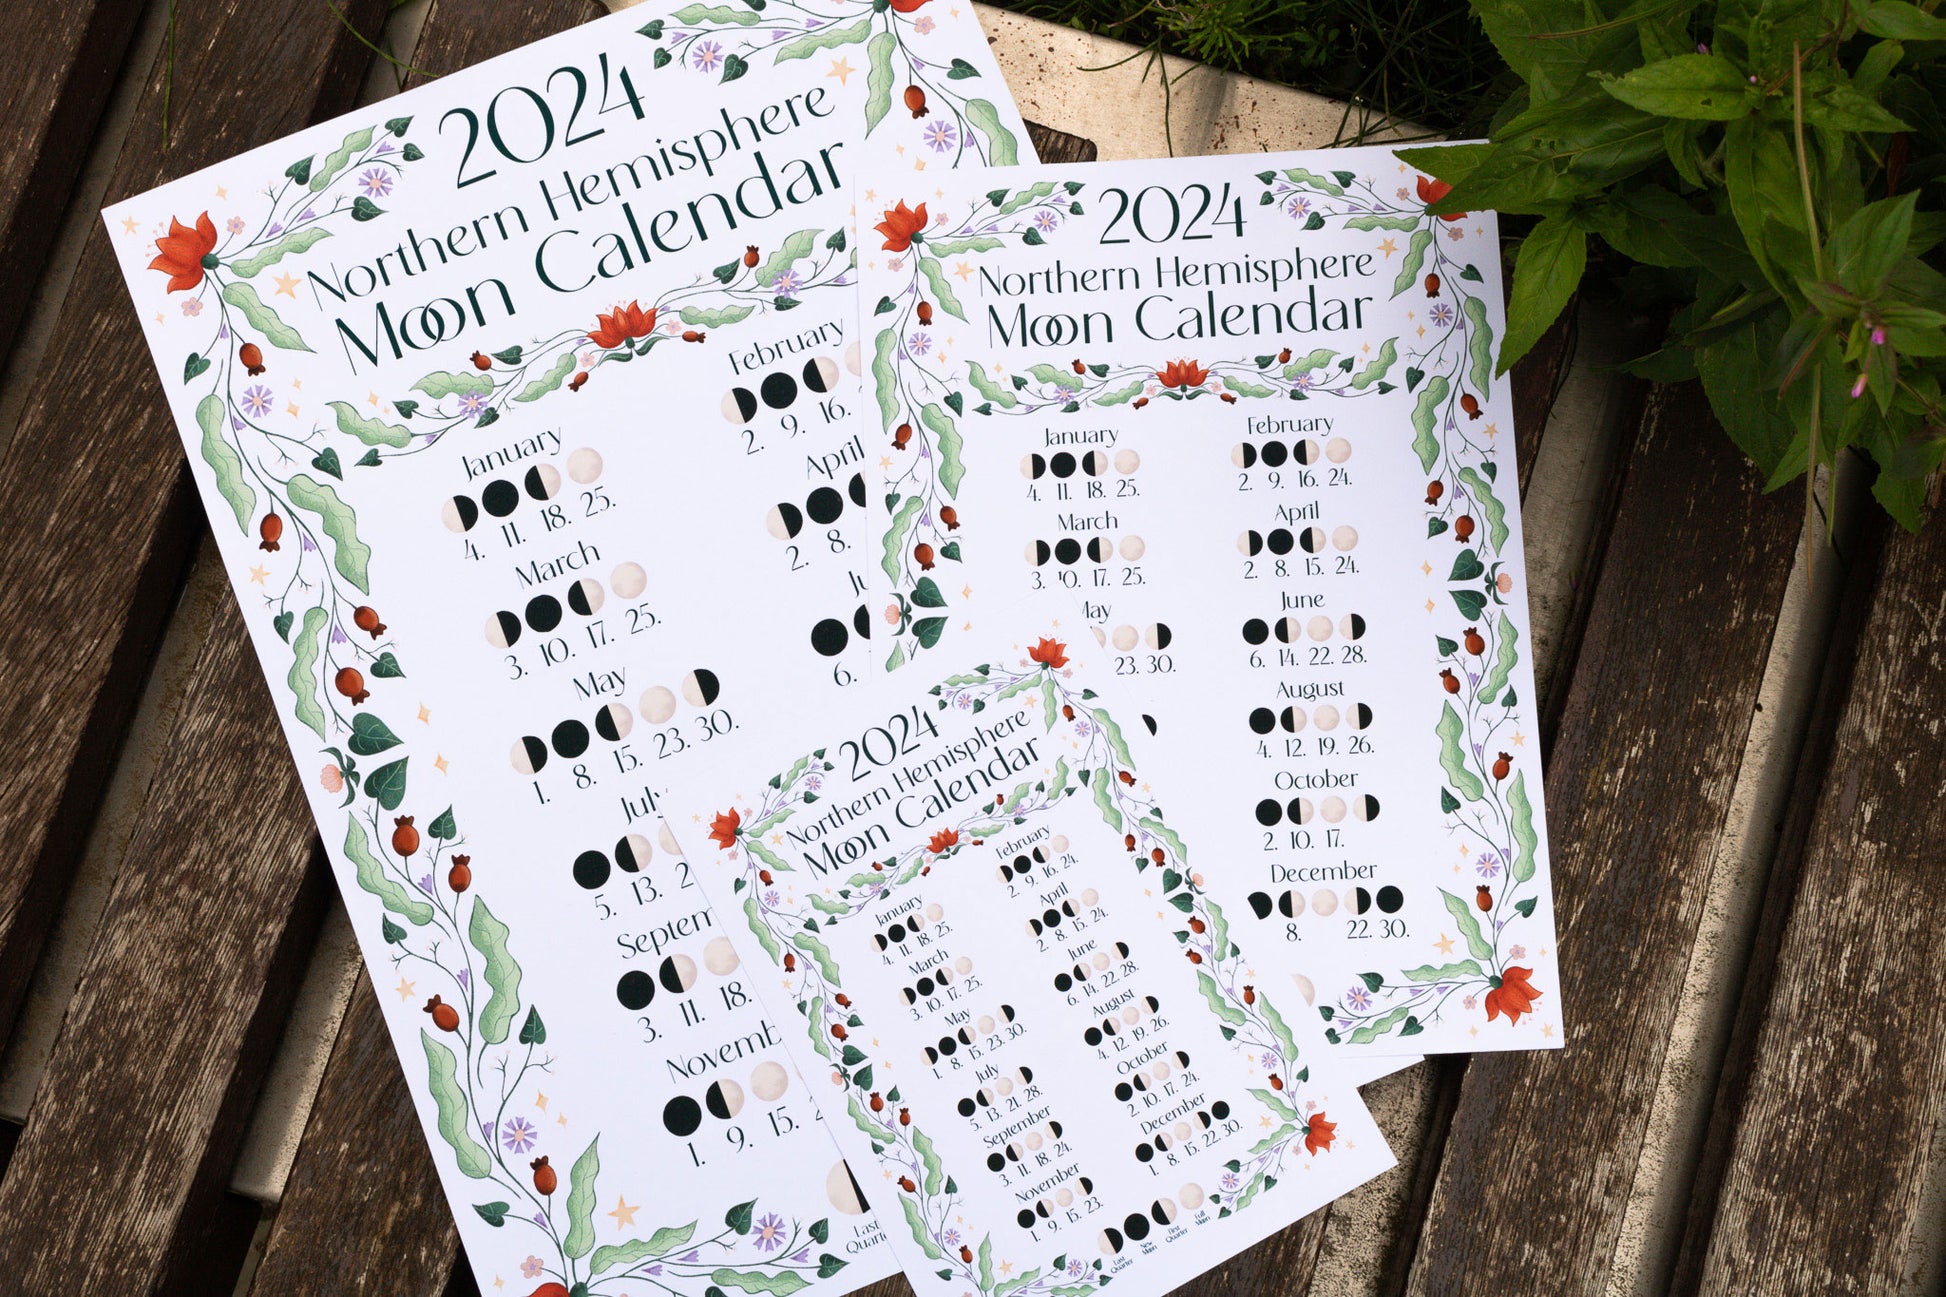 2024 Moon Calendar Northern Hemisphere with illustrated floral design by Mellow Apricot Studio - three sizes: A3, A4 and A5